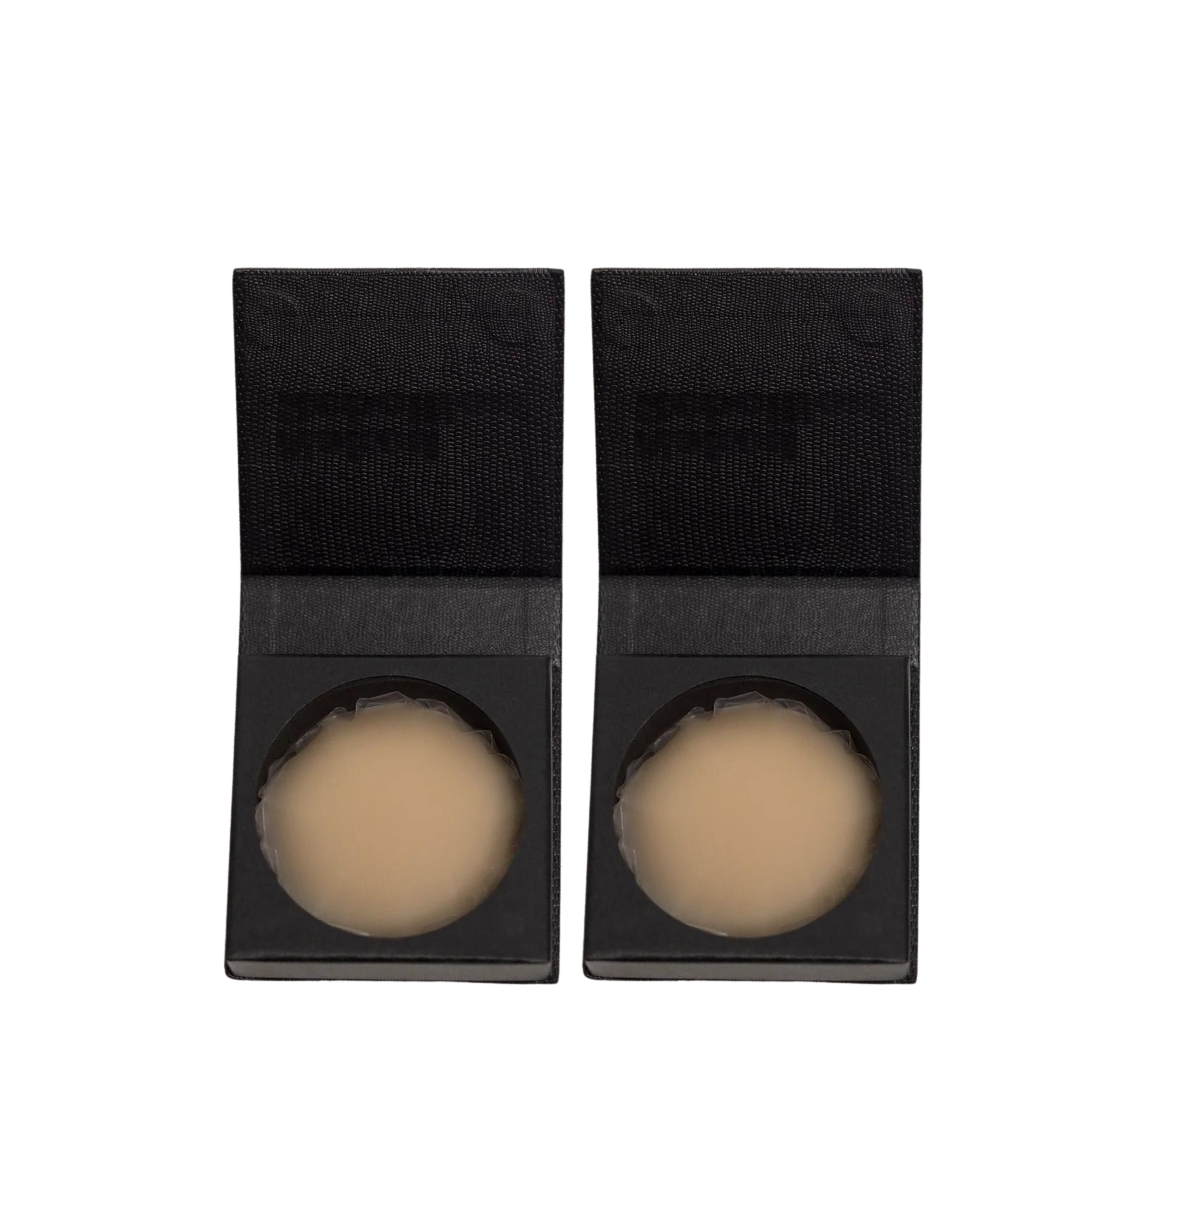 Women's Reusable Round Nipple Stickies No Show Adhesive Covers: 2 Pack Set - Mocha